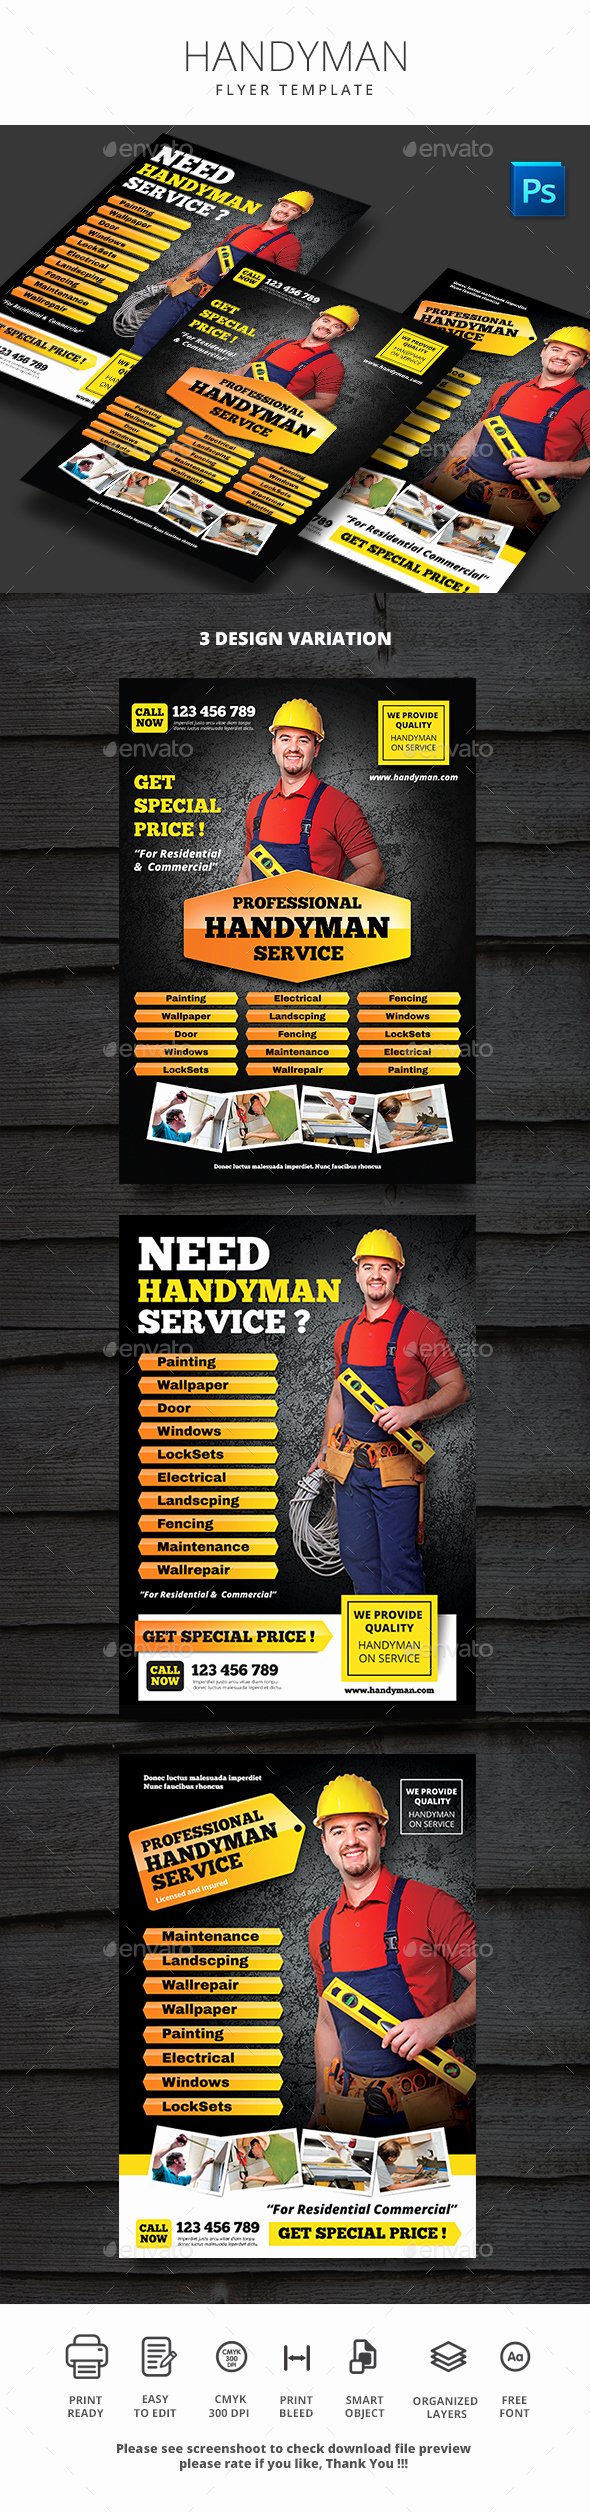 Handyman Flyer Templates Free Download Awesome Handyman Flyer by Monggokerso